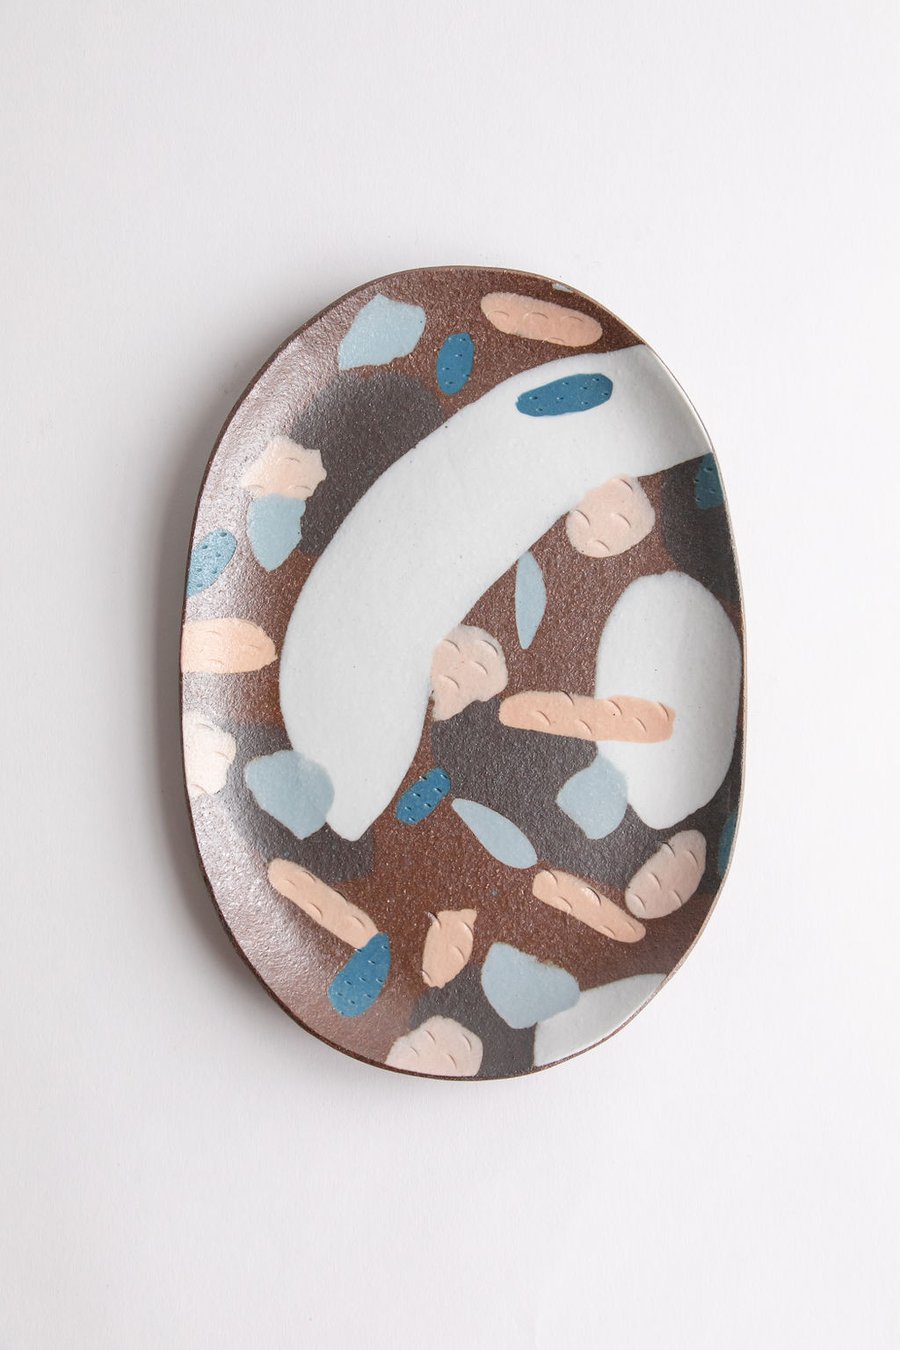 Image of Oval Porcelain Inlay Serving Platter - Red Mesa with Pastel pinks, white, brown and teal